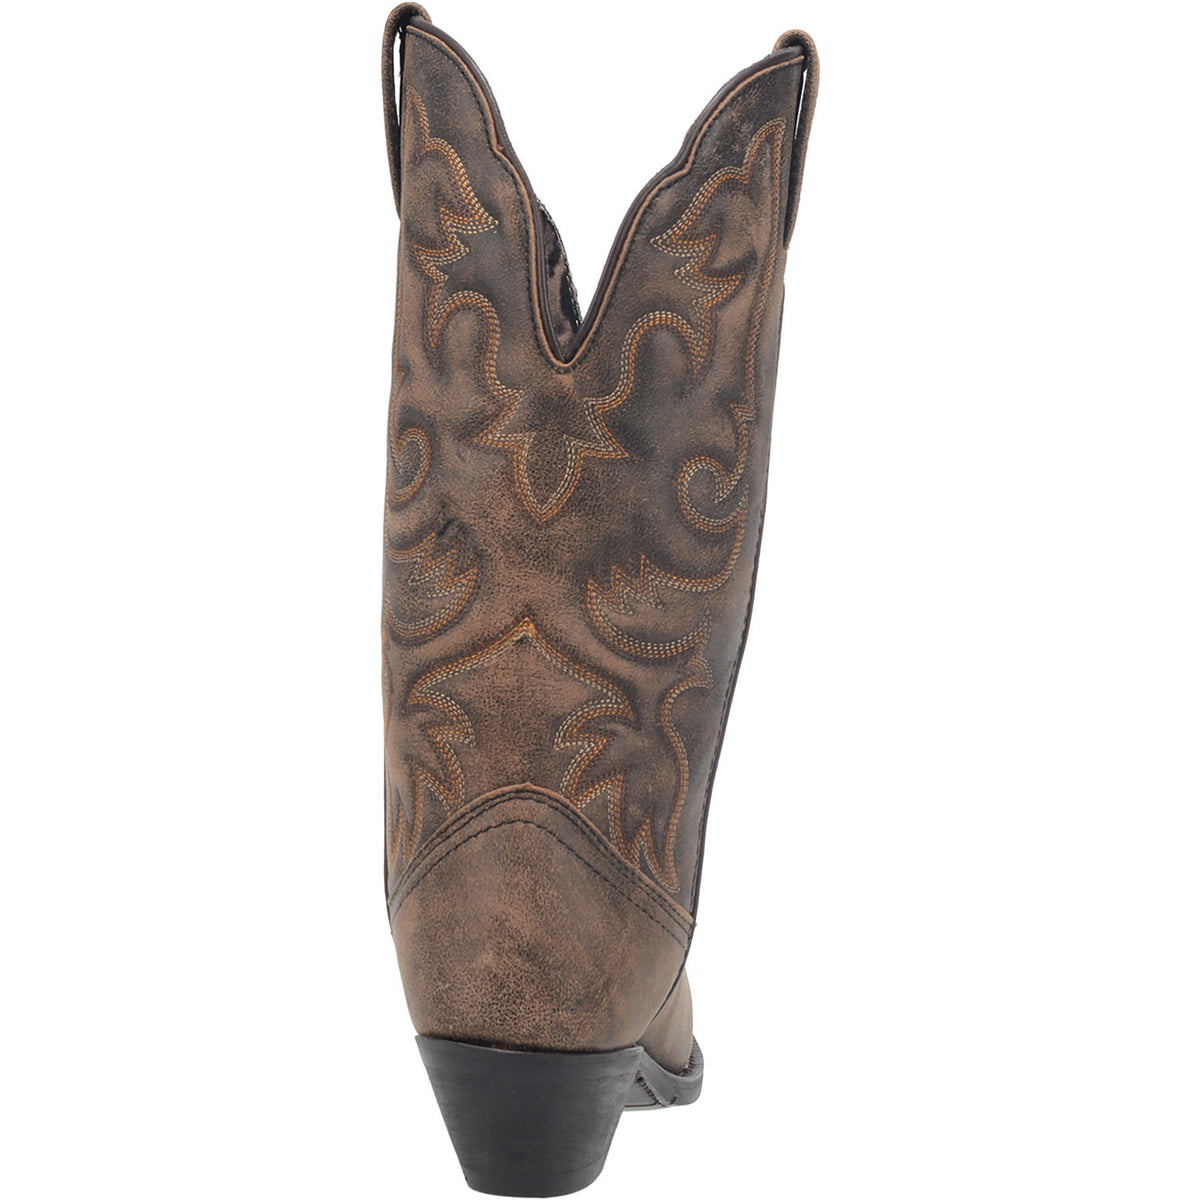 ACCESS WIDE CALF LEATHER BOOT Cover